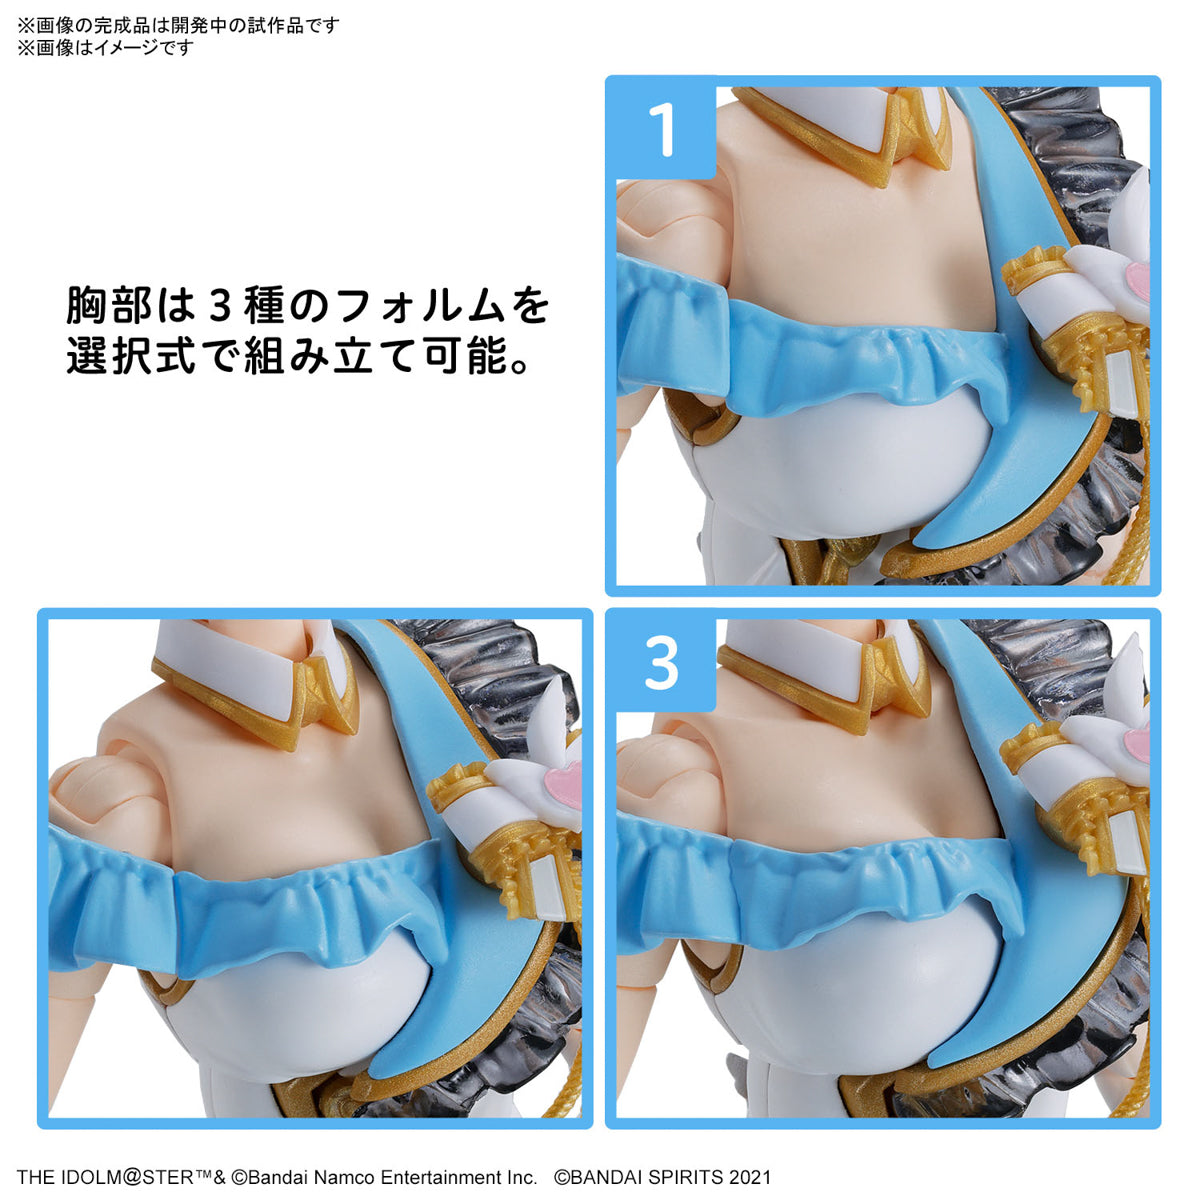 [PRE-ORDER] 30MS Option Body Parts Beyond The Blue Sky 1 (Color B)